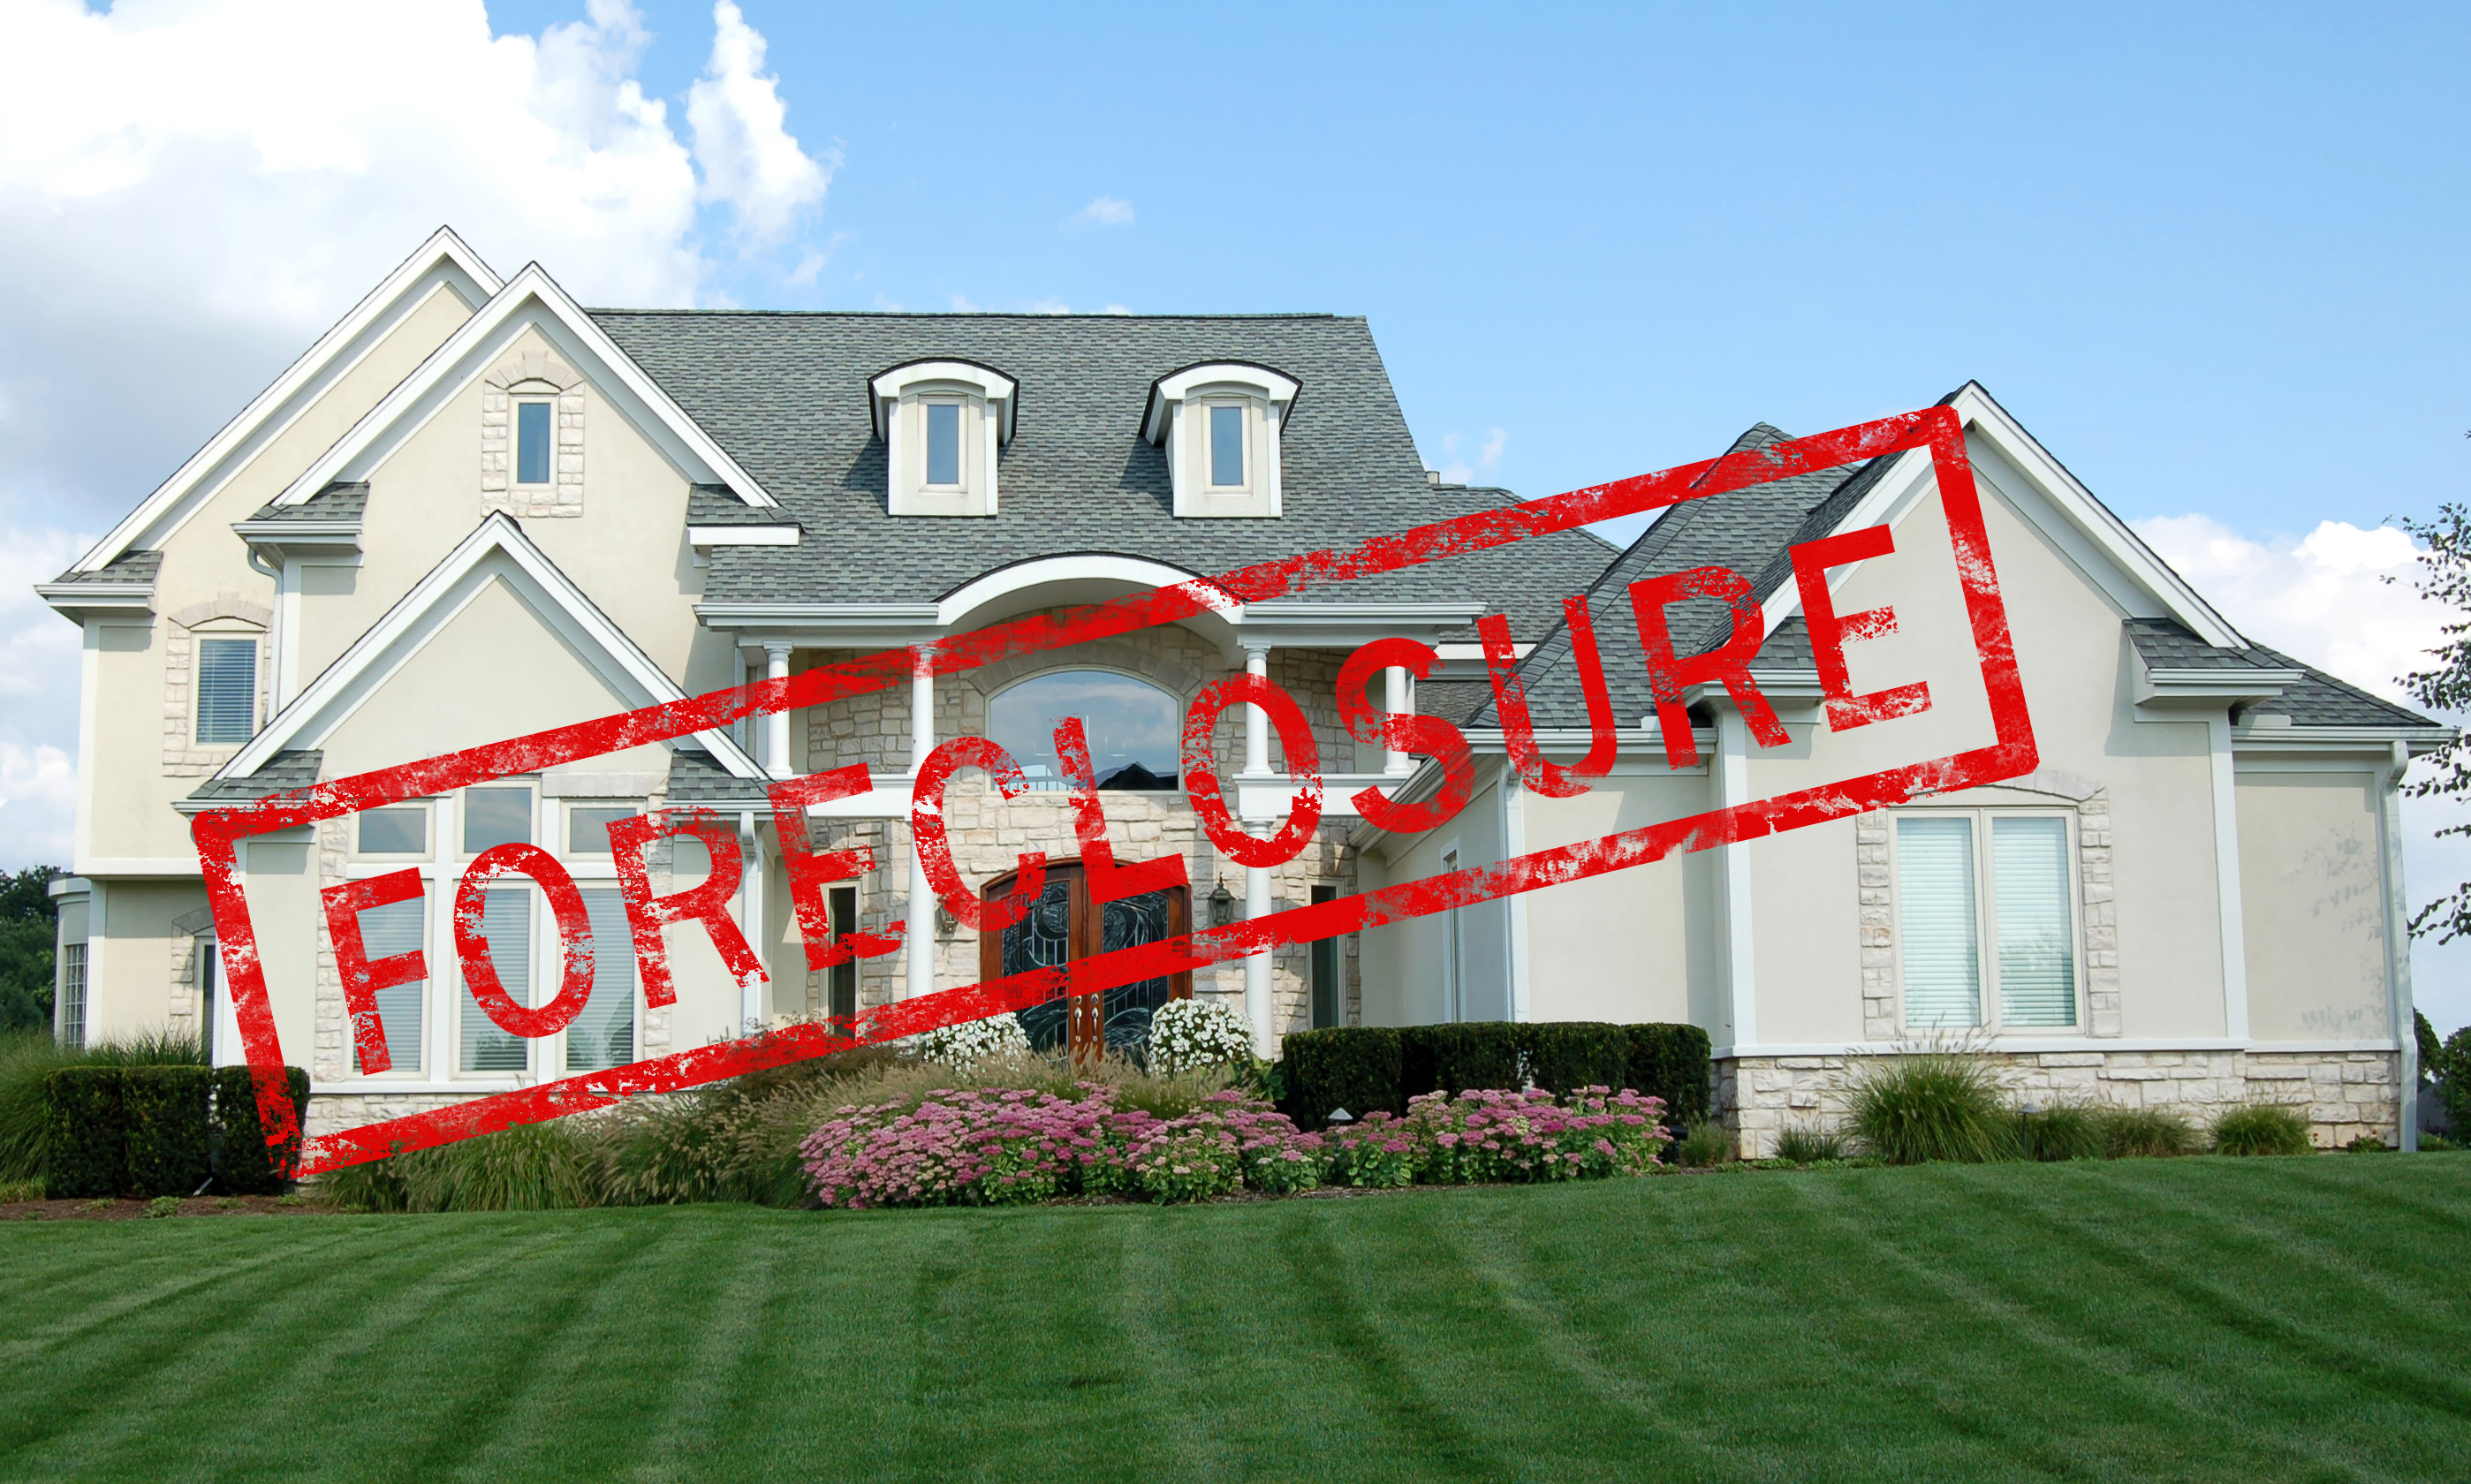 Call McRae Appraisals LLC when you need appraisals pertaining to Black Hawk foreclosures